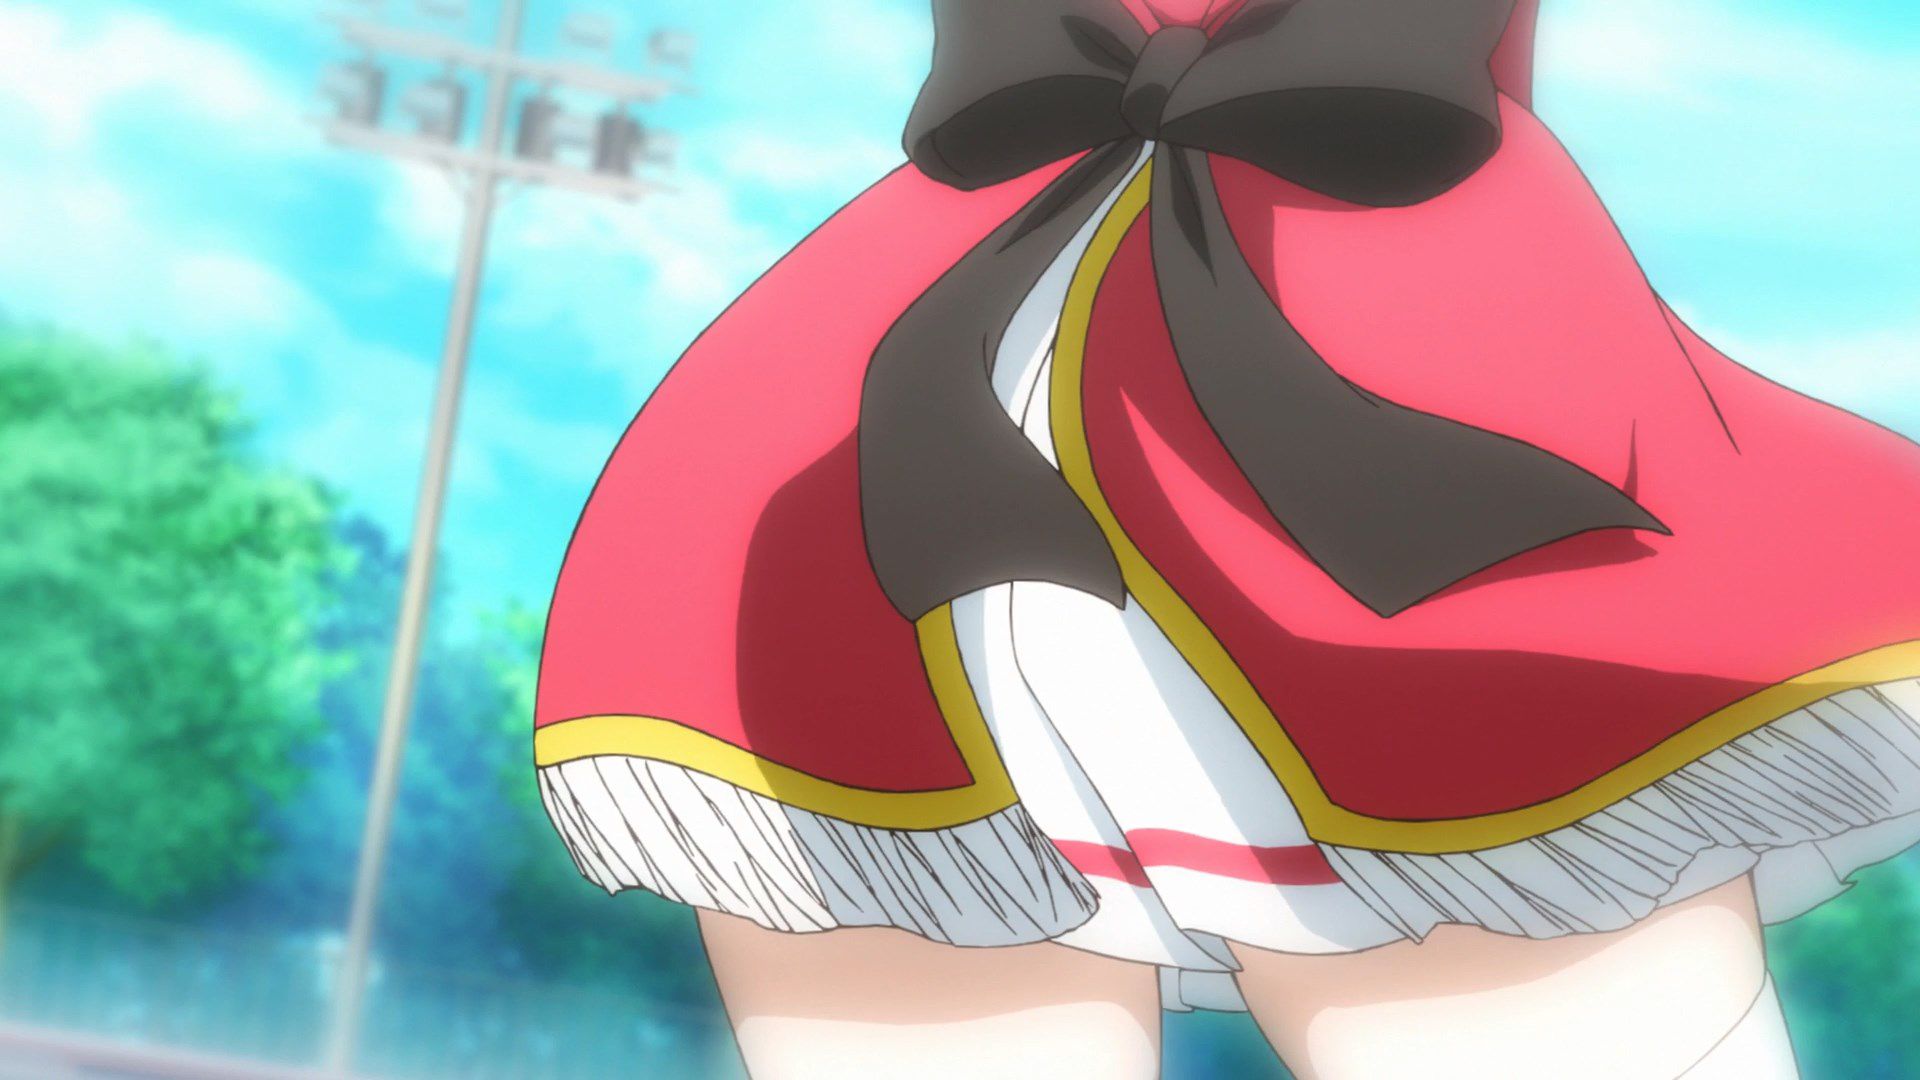 [God images] "love live! ' Μm ' PV's leg is too erotic everyone wakes up to a leg fetish of wwwww 41